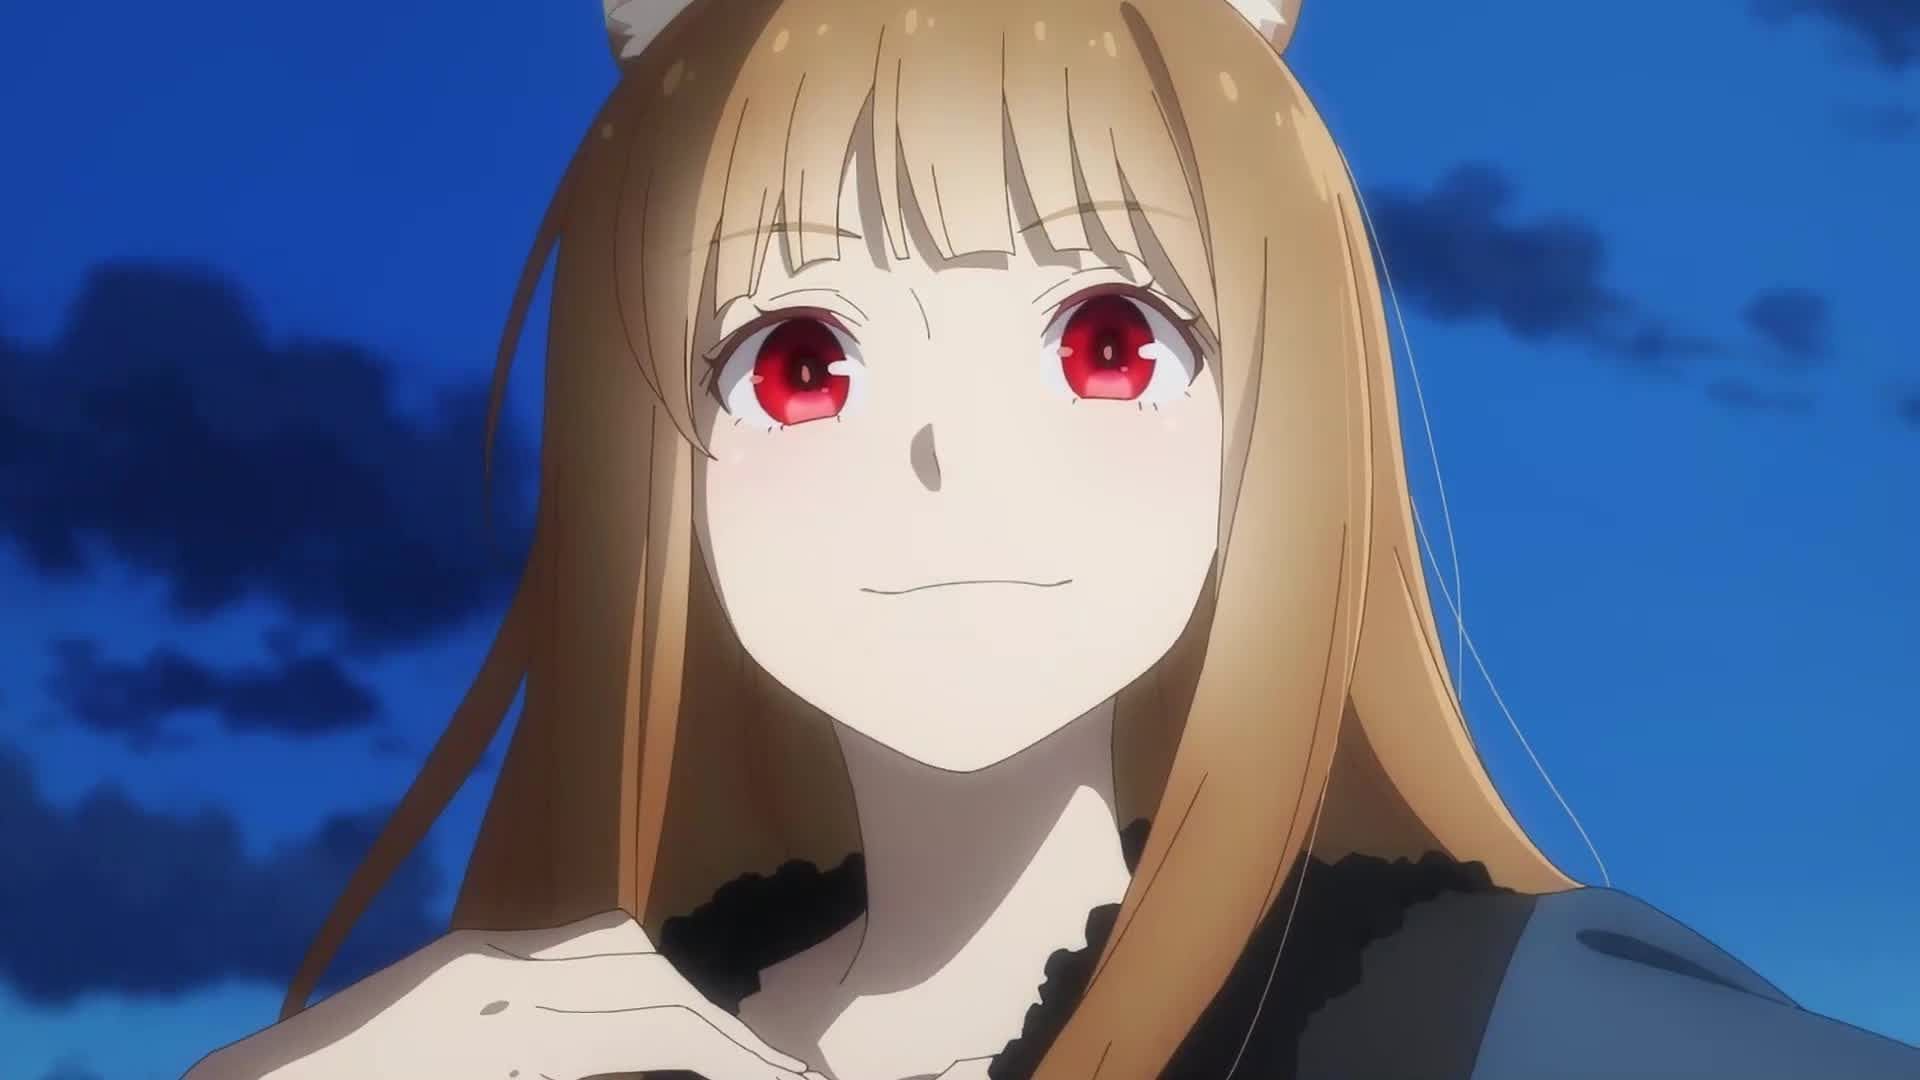 Holo as seen in the anime series (Image via Studio Passione)